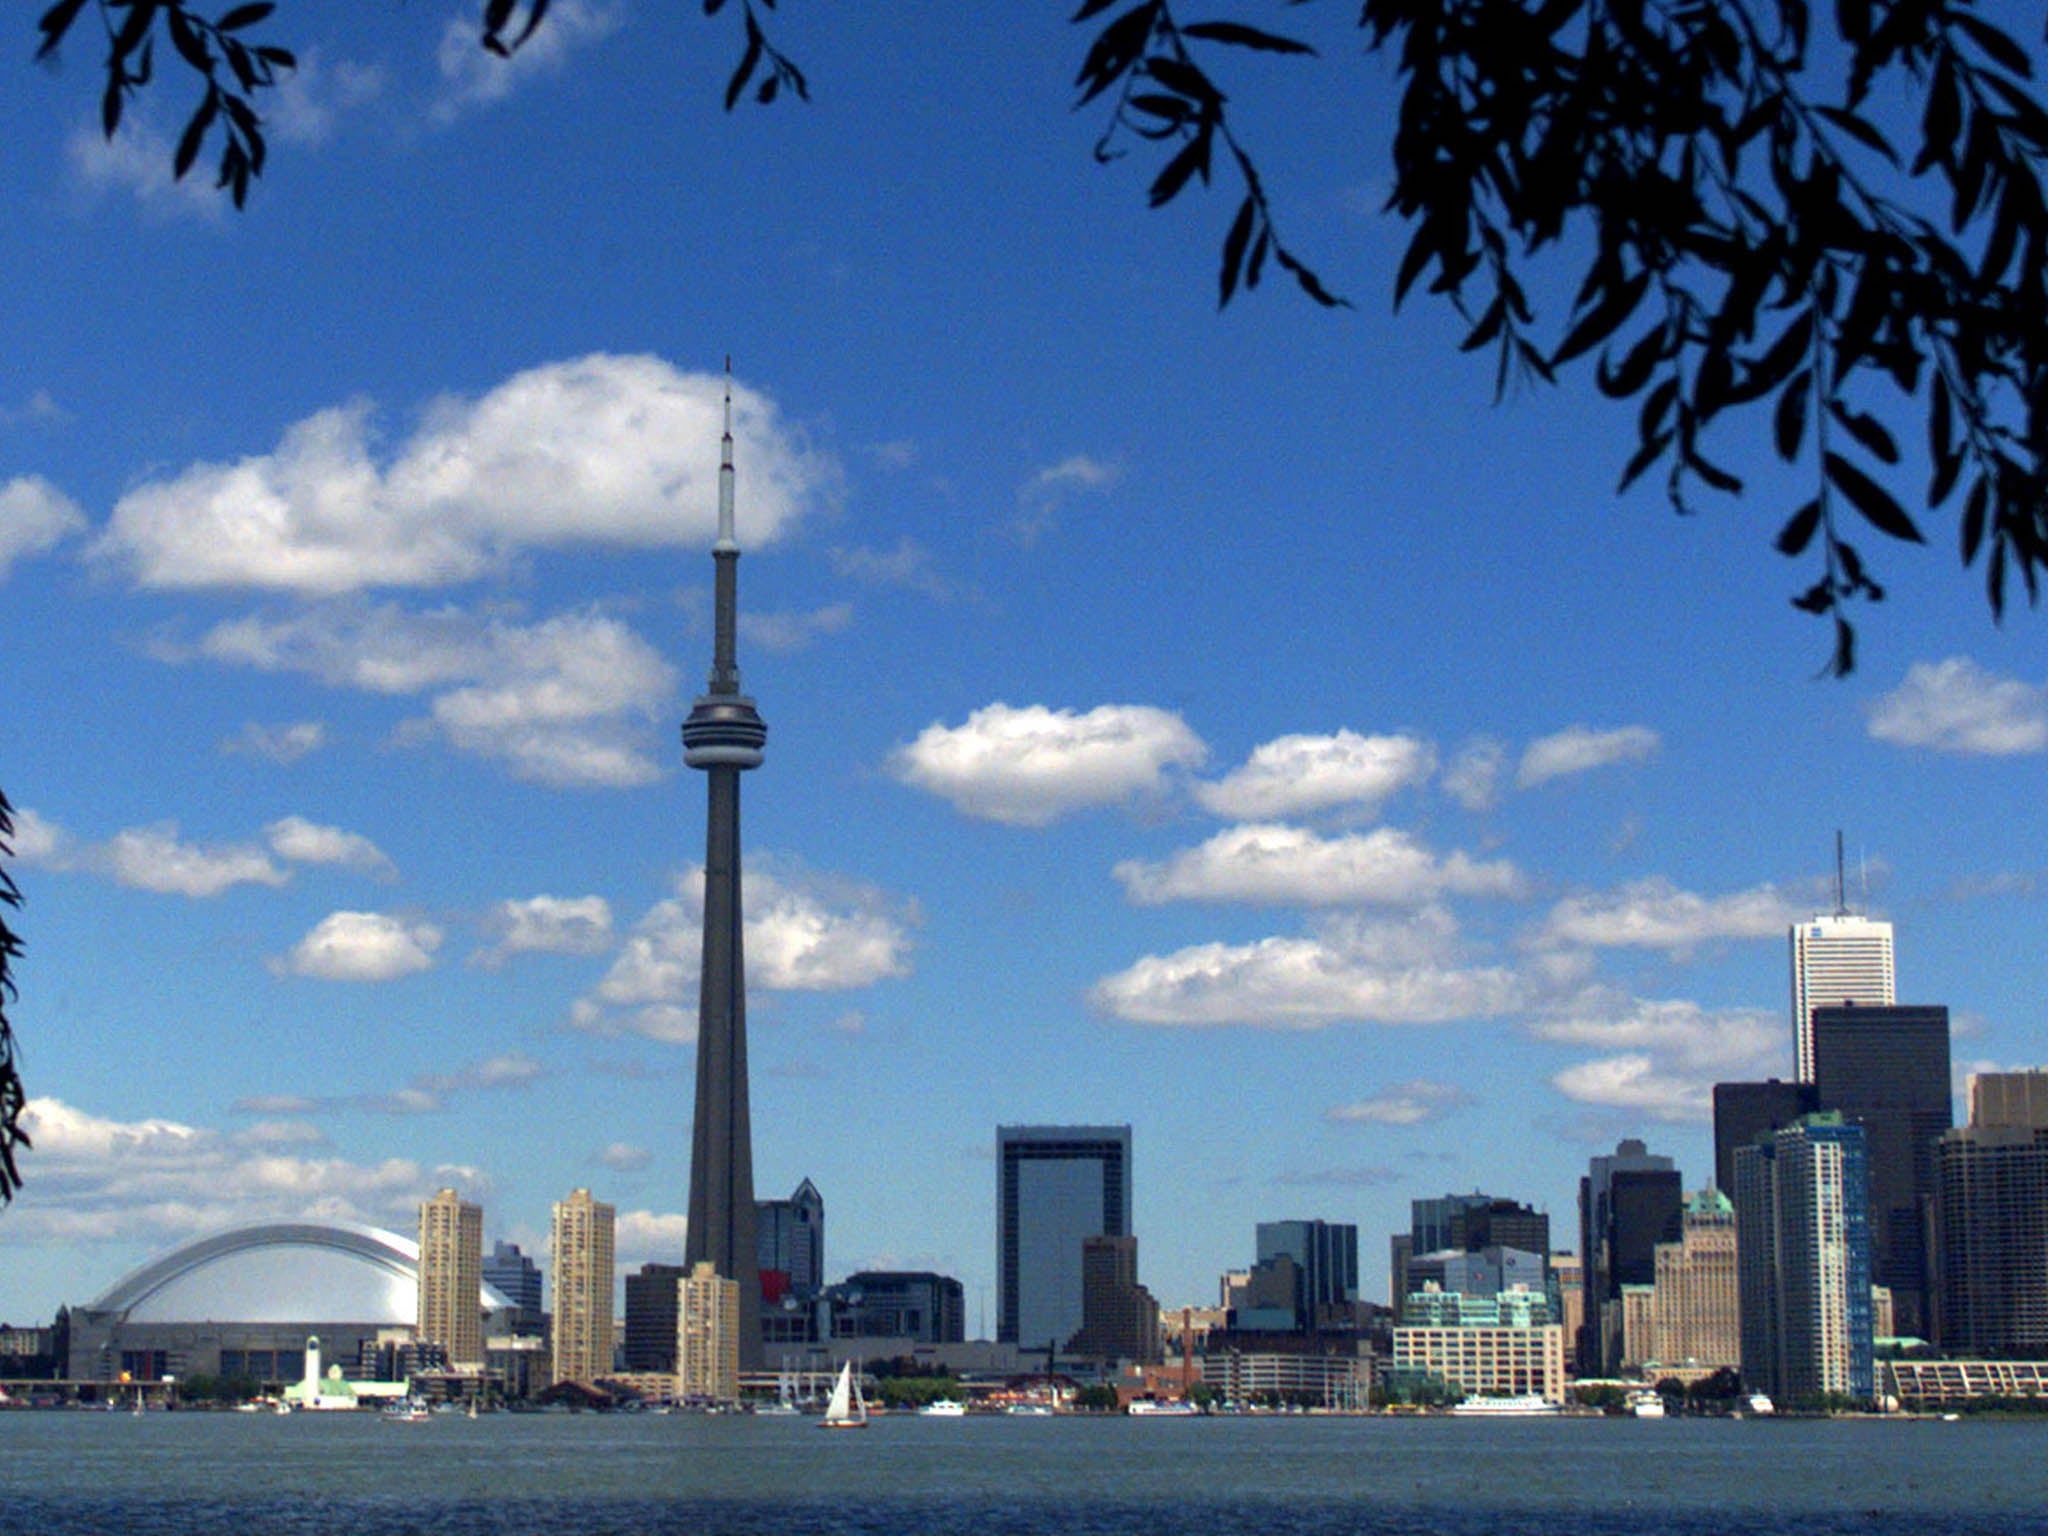 Toronto was recently voted the world's fourth most liveable city